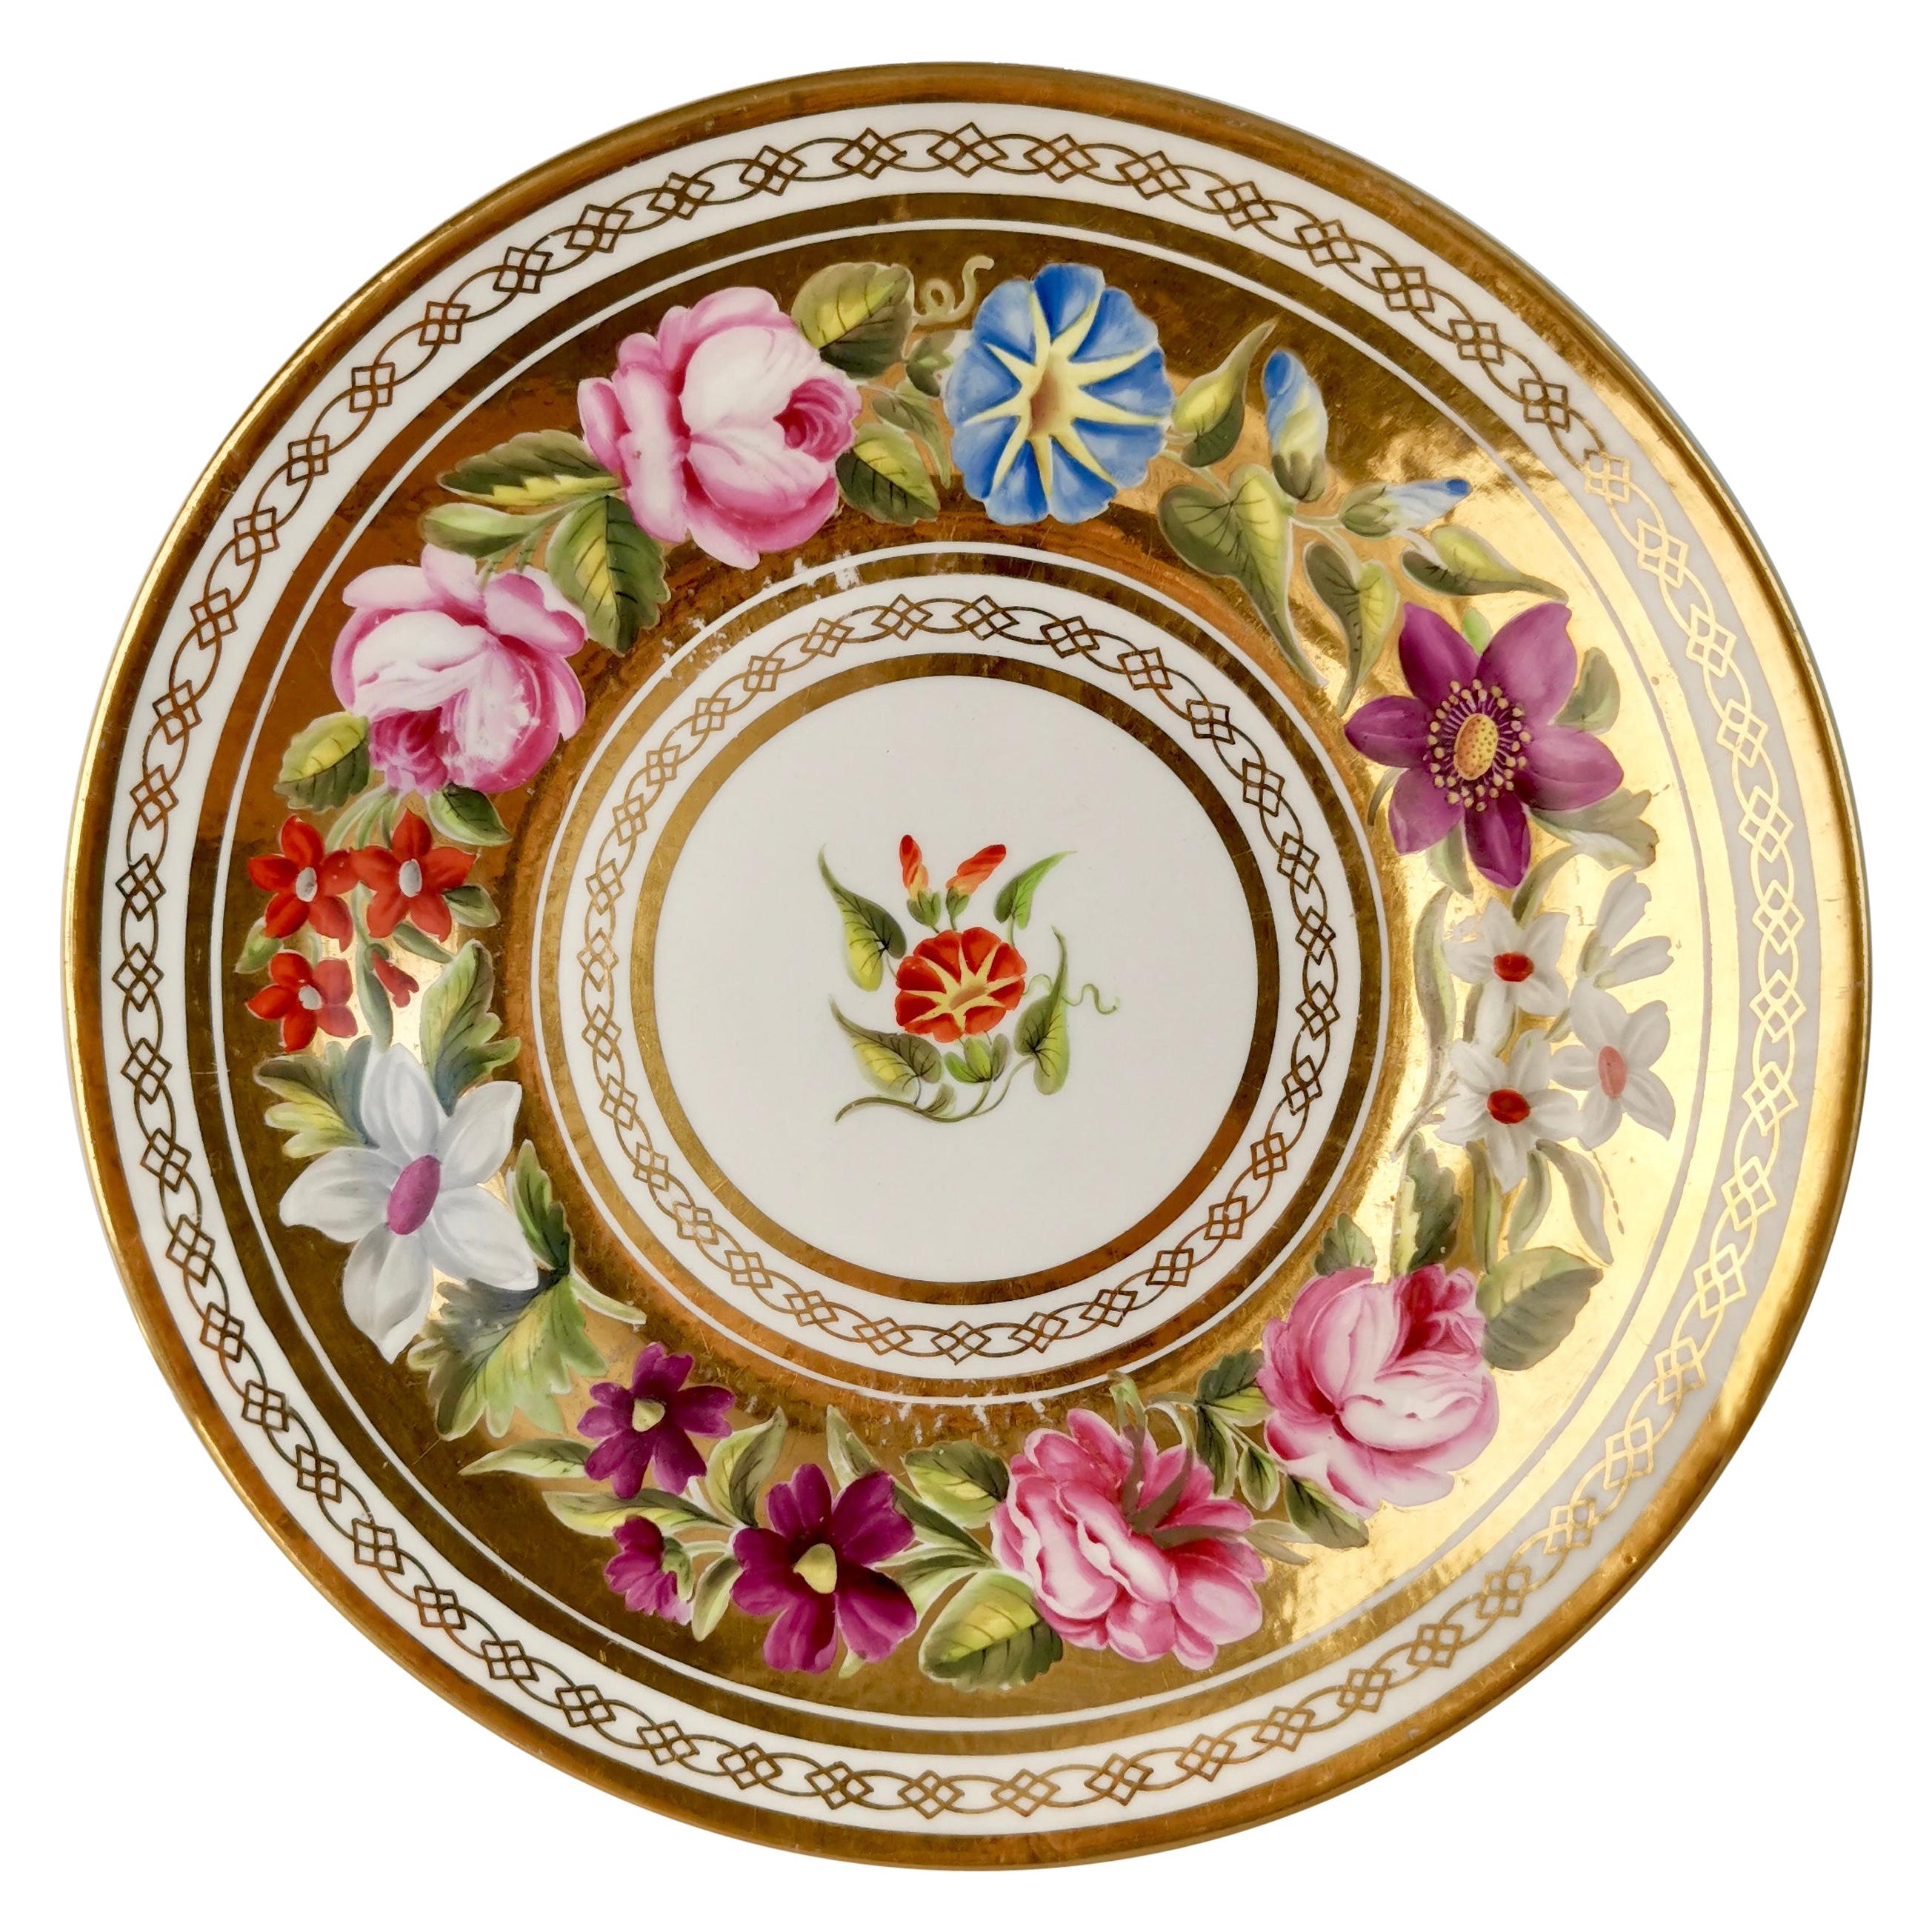 Coalport Plate, Marquis of Anglesey Service, circa 1820